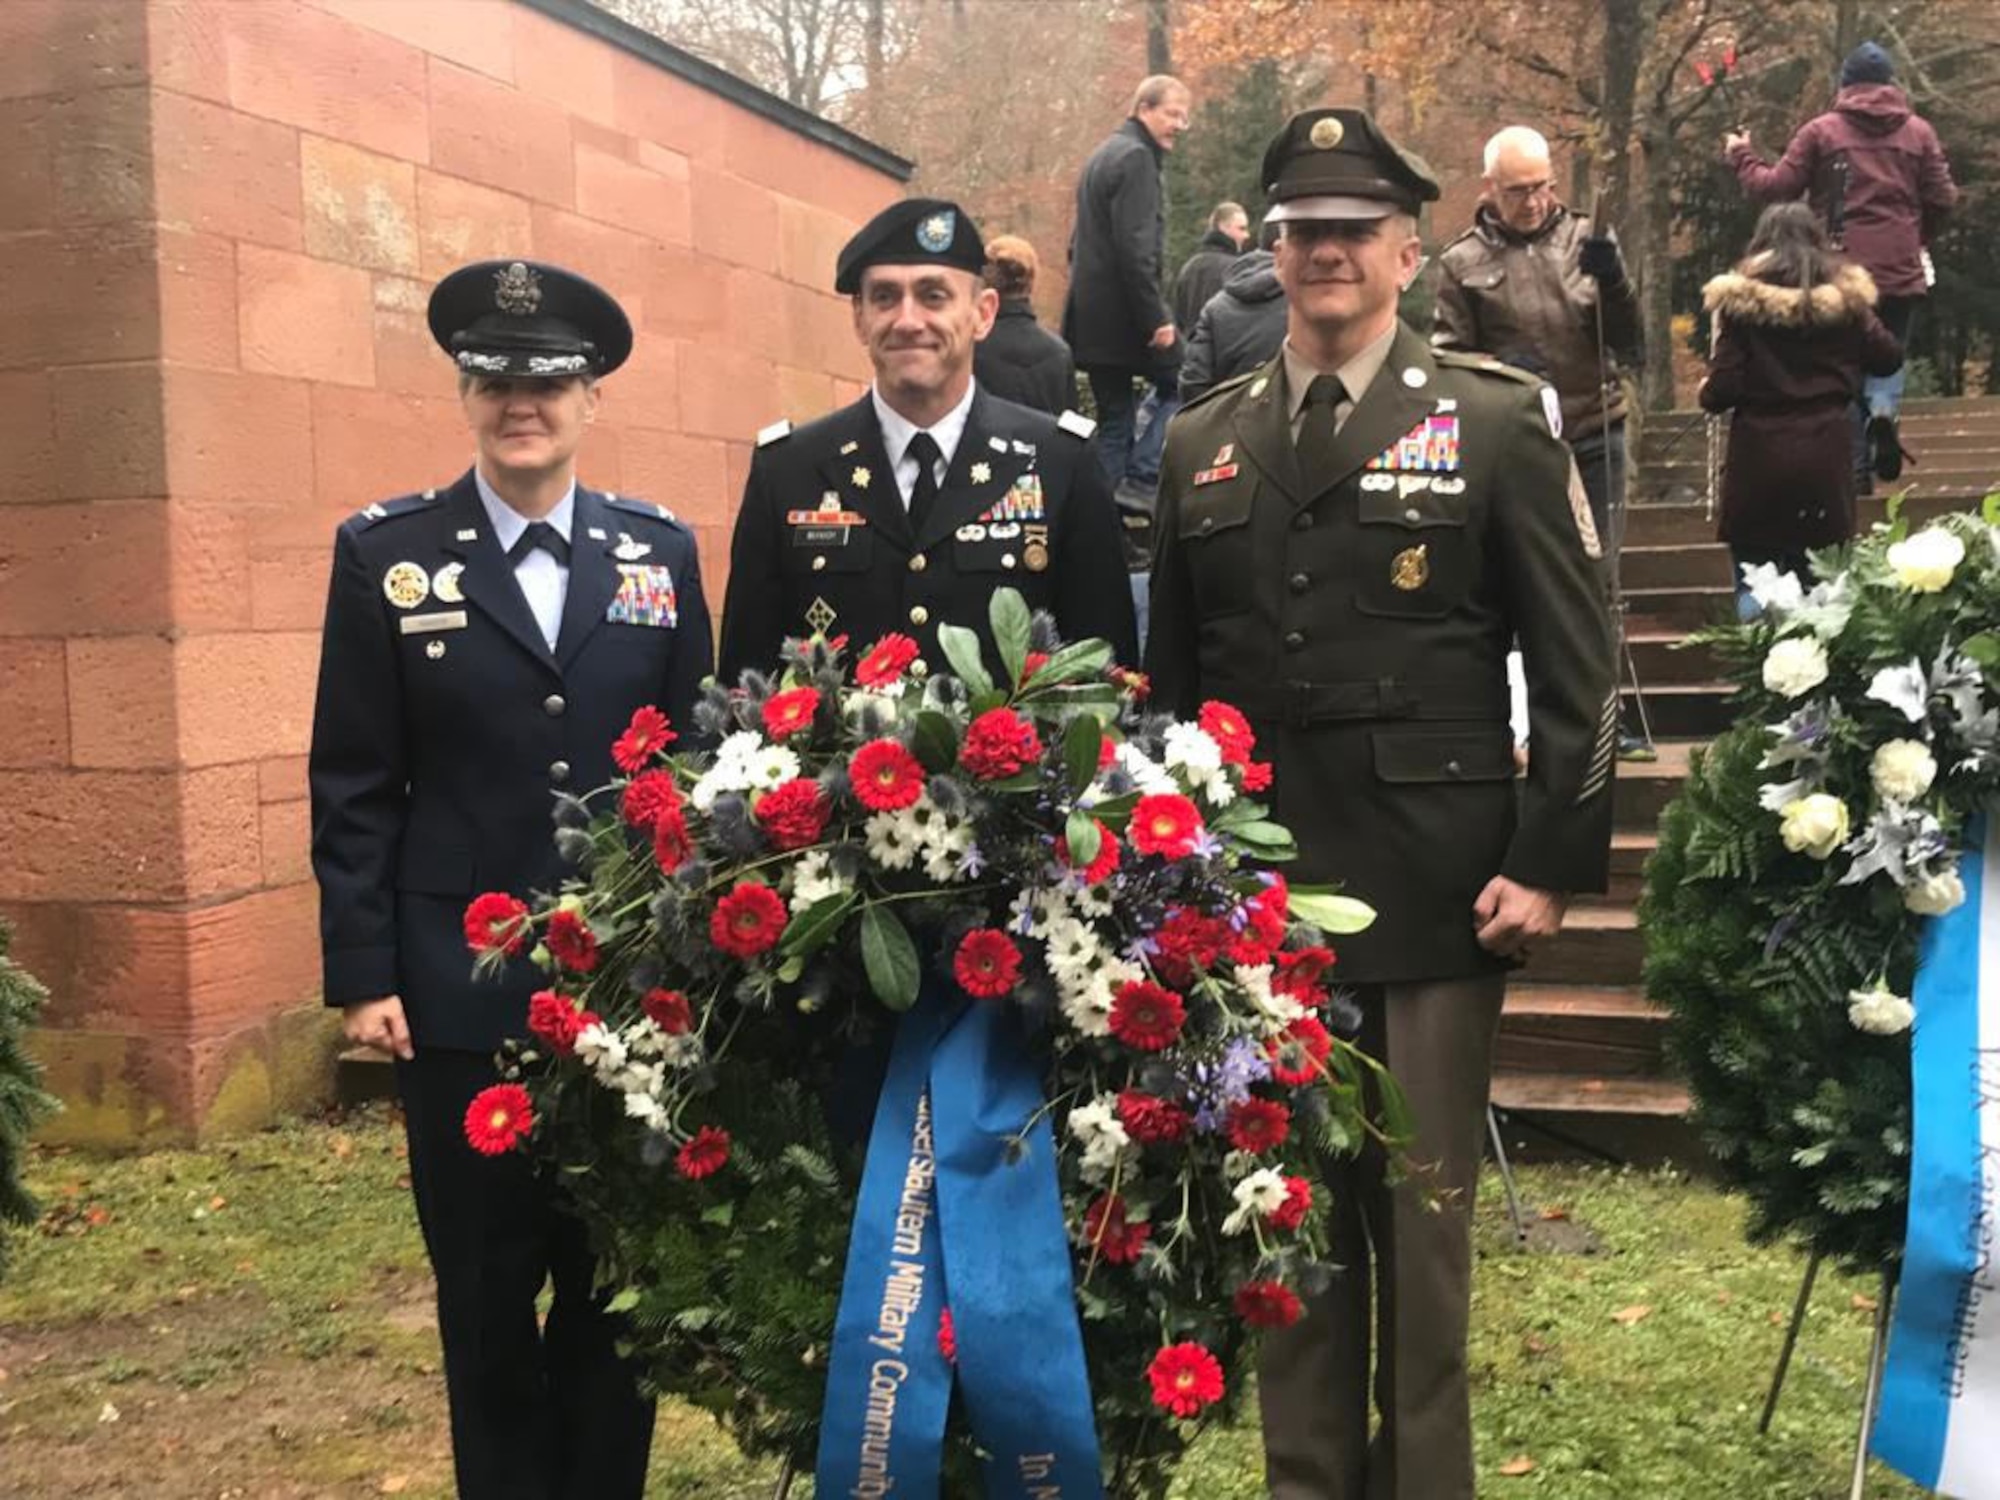 Three military members standing behind a floral wreath.